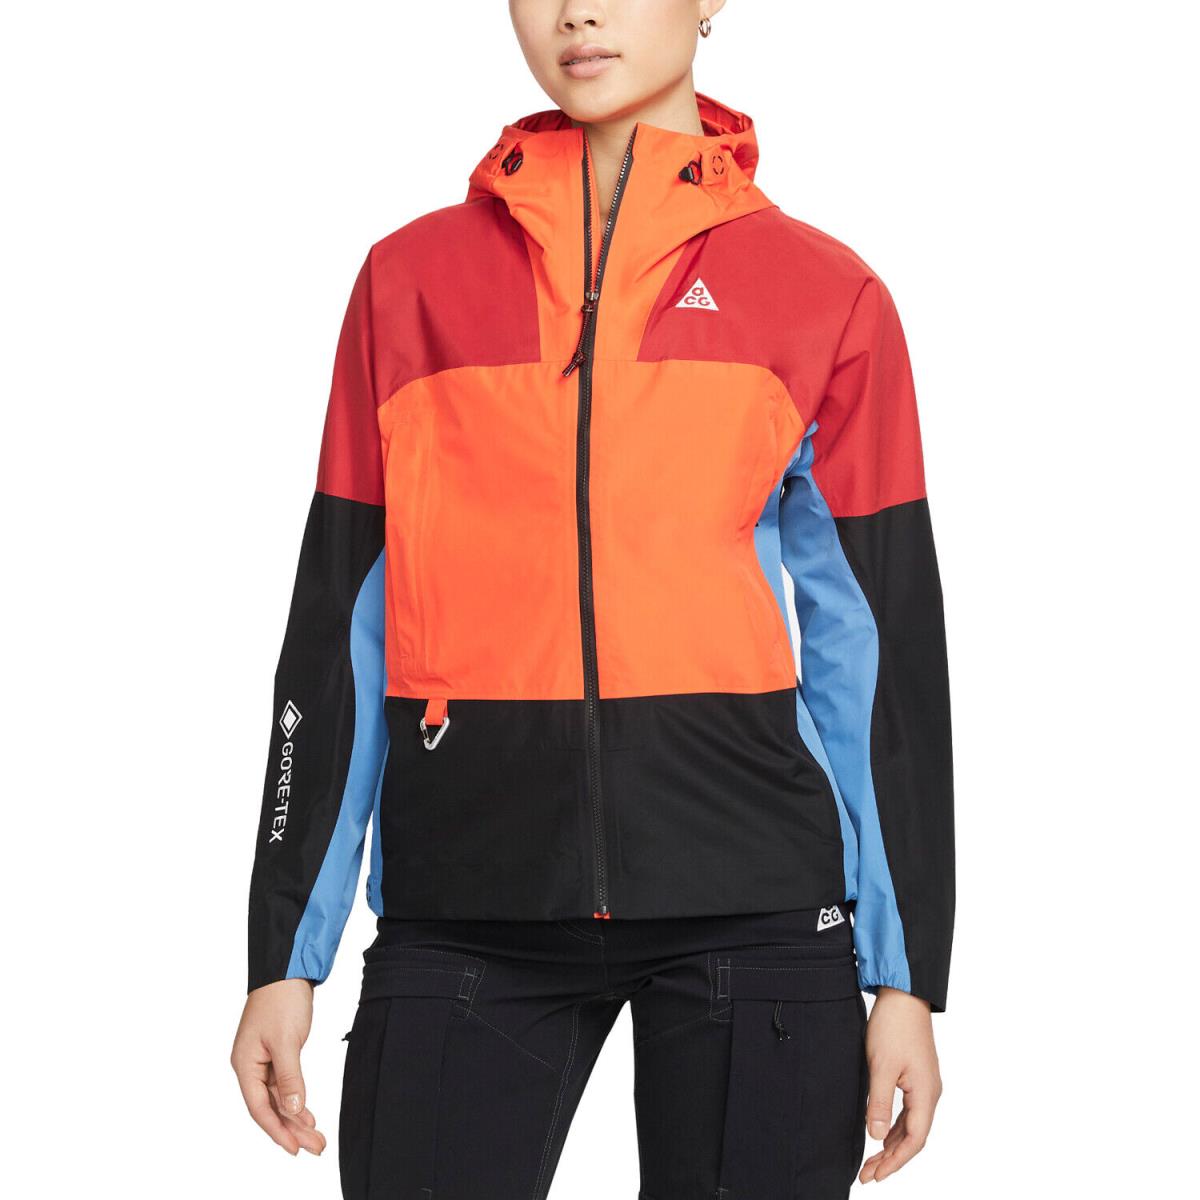 Nike Storm-fit Adv Acg Chain of Craters Women`s Jacket DB8149